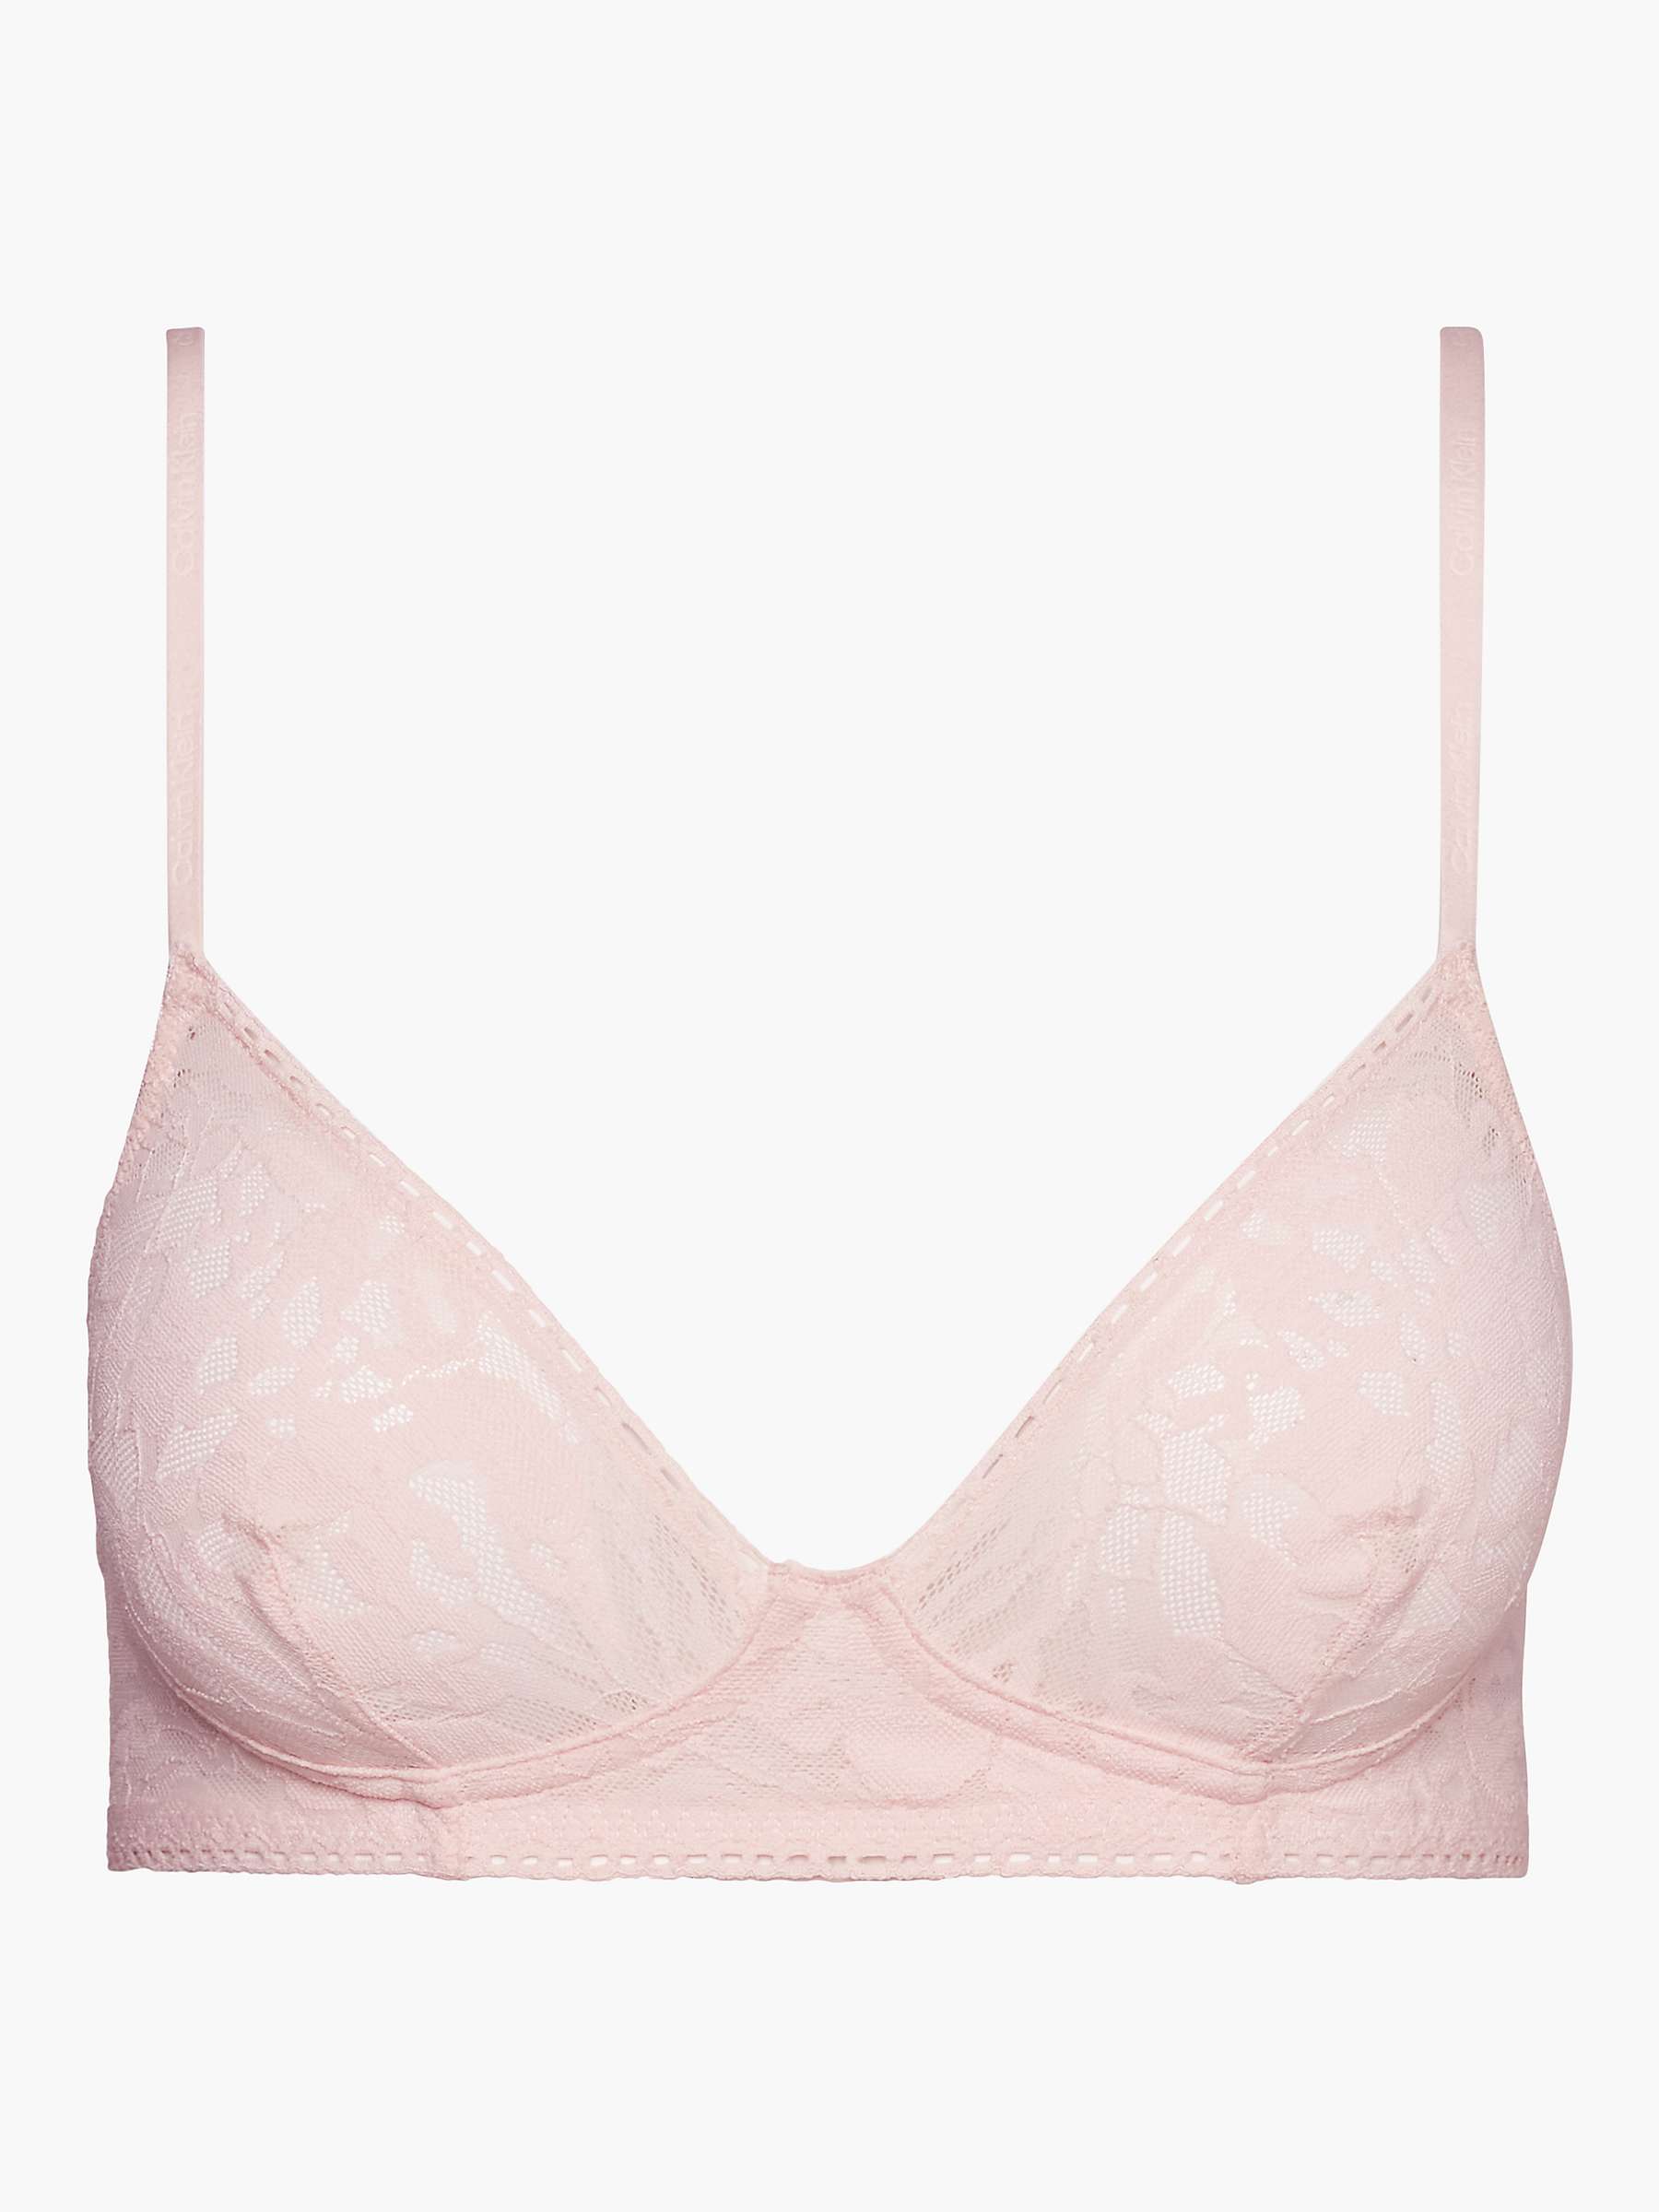 Buy Calvin Klein Ultra Comfort Lace Bralette, Nymphs Thigh Online at johnlewis.com